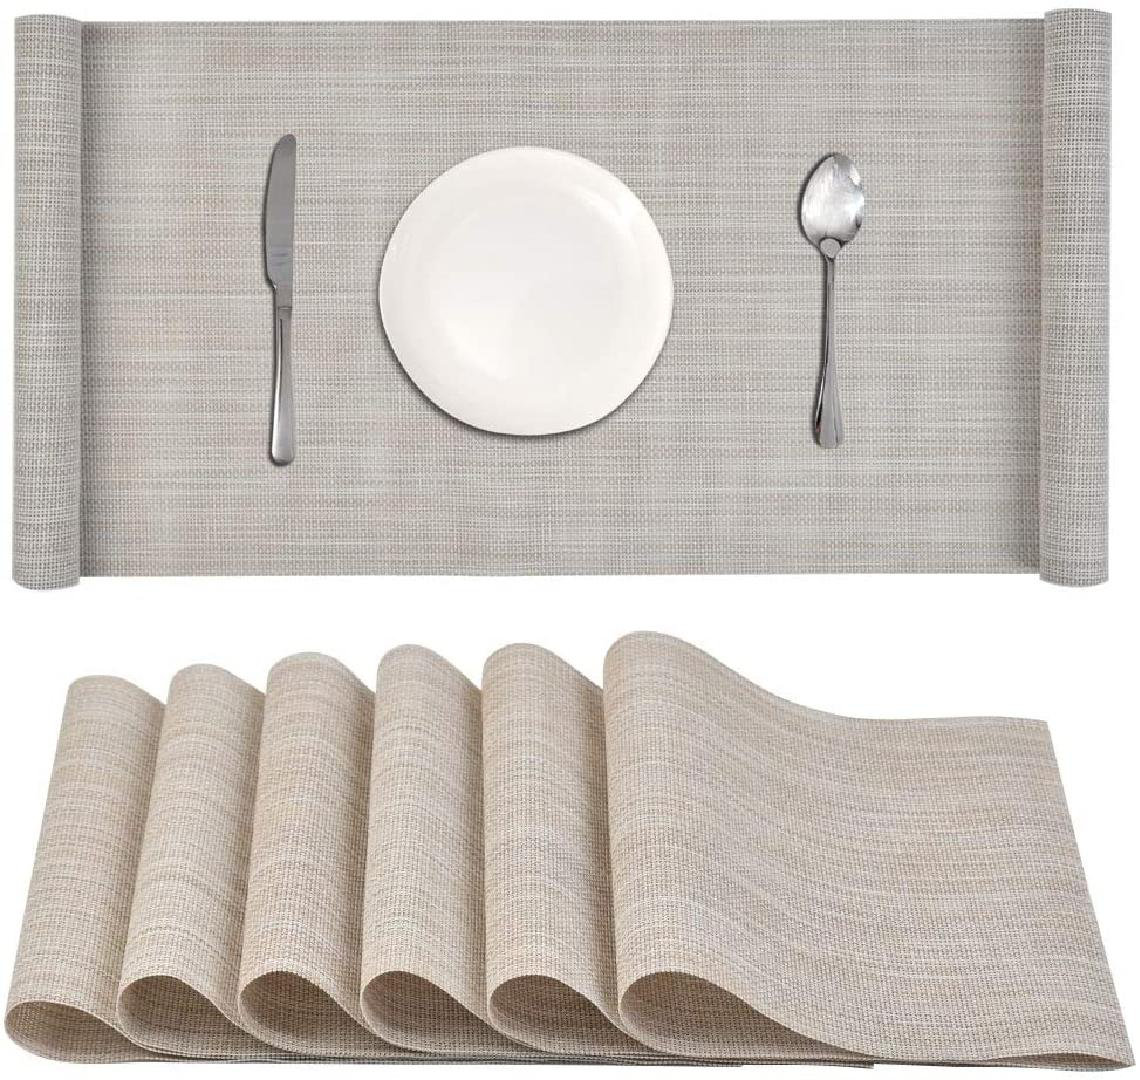 Stain Scratch Anti-Skid Woven Washable Outdoor Placemat 6 pcs Placemats for Dining Tablemats Wipeable Heat Resistant Kitchen Table Mats Set of 6 